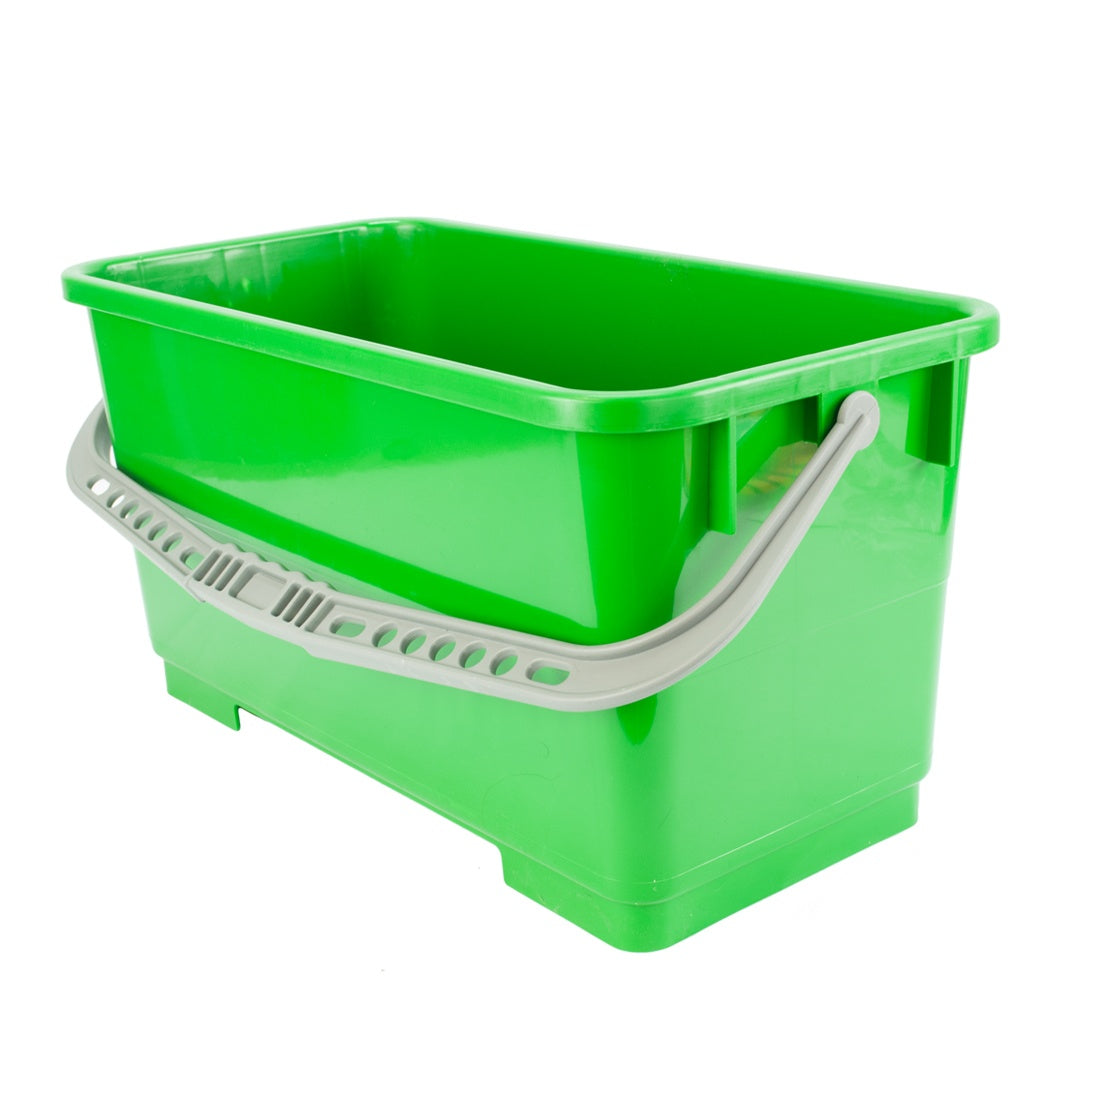 Plastic Buckets With Handle And Lid, High Quality Plastic Buckets